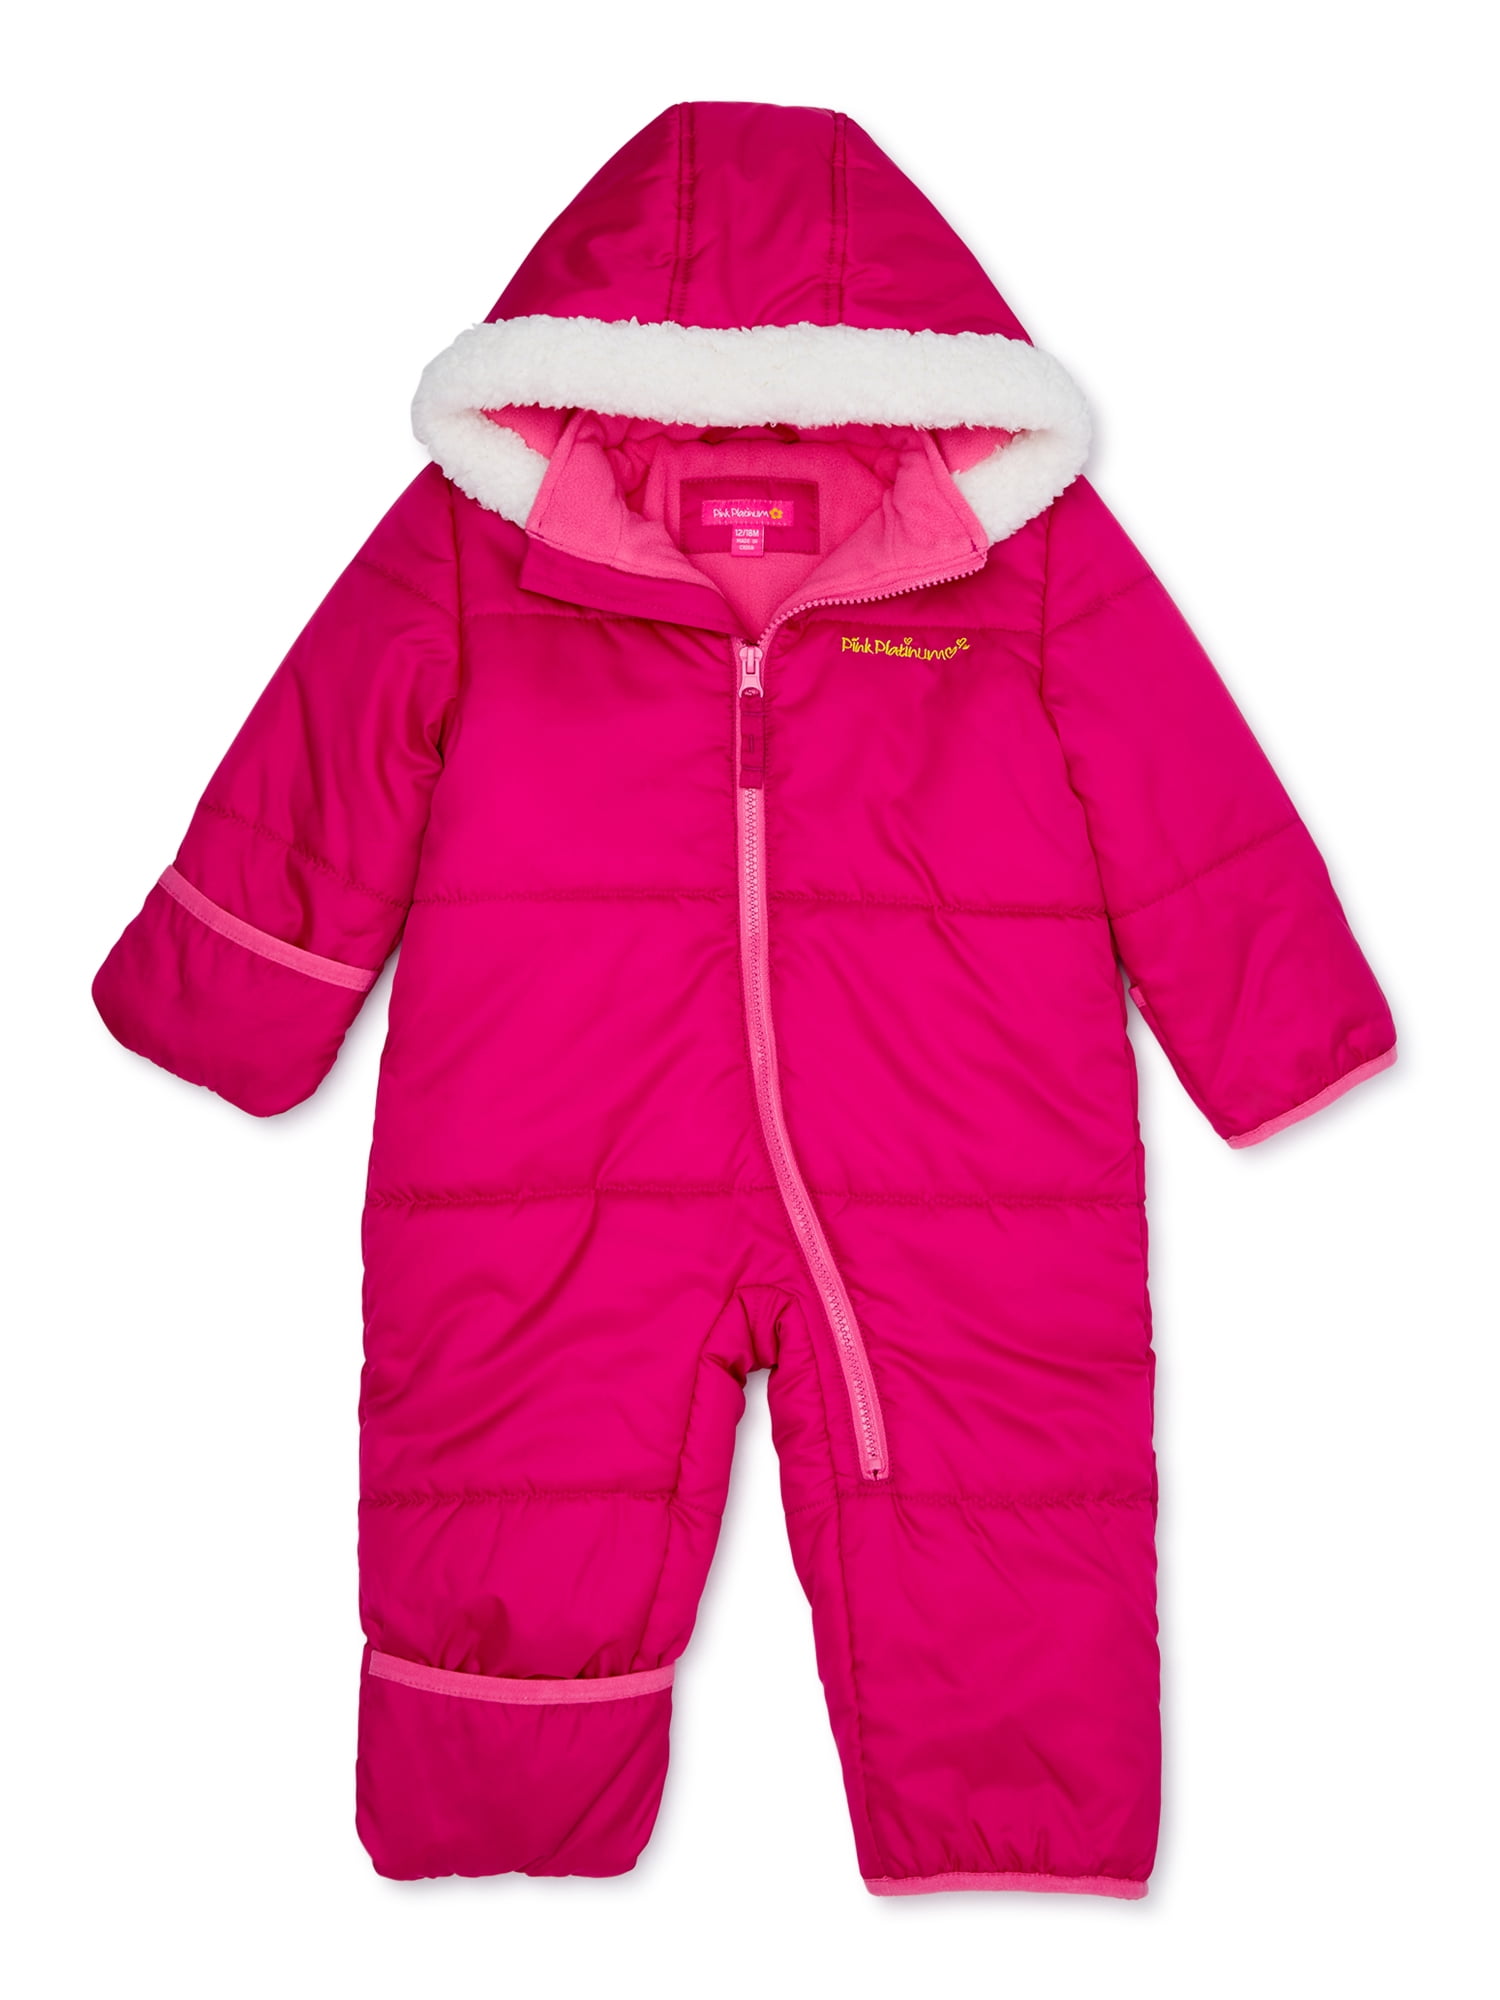 New $600 Authentic Dolce & Gabbana Infant Baby Girl Pink Winter Snowsuit 3-6-9 